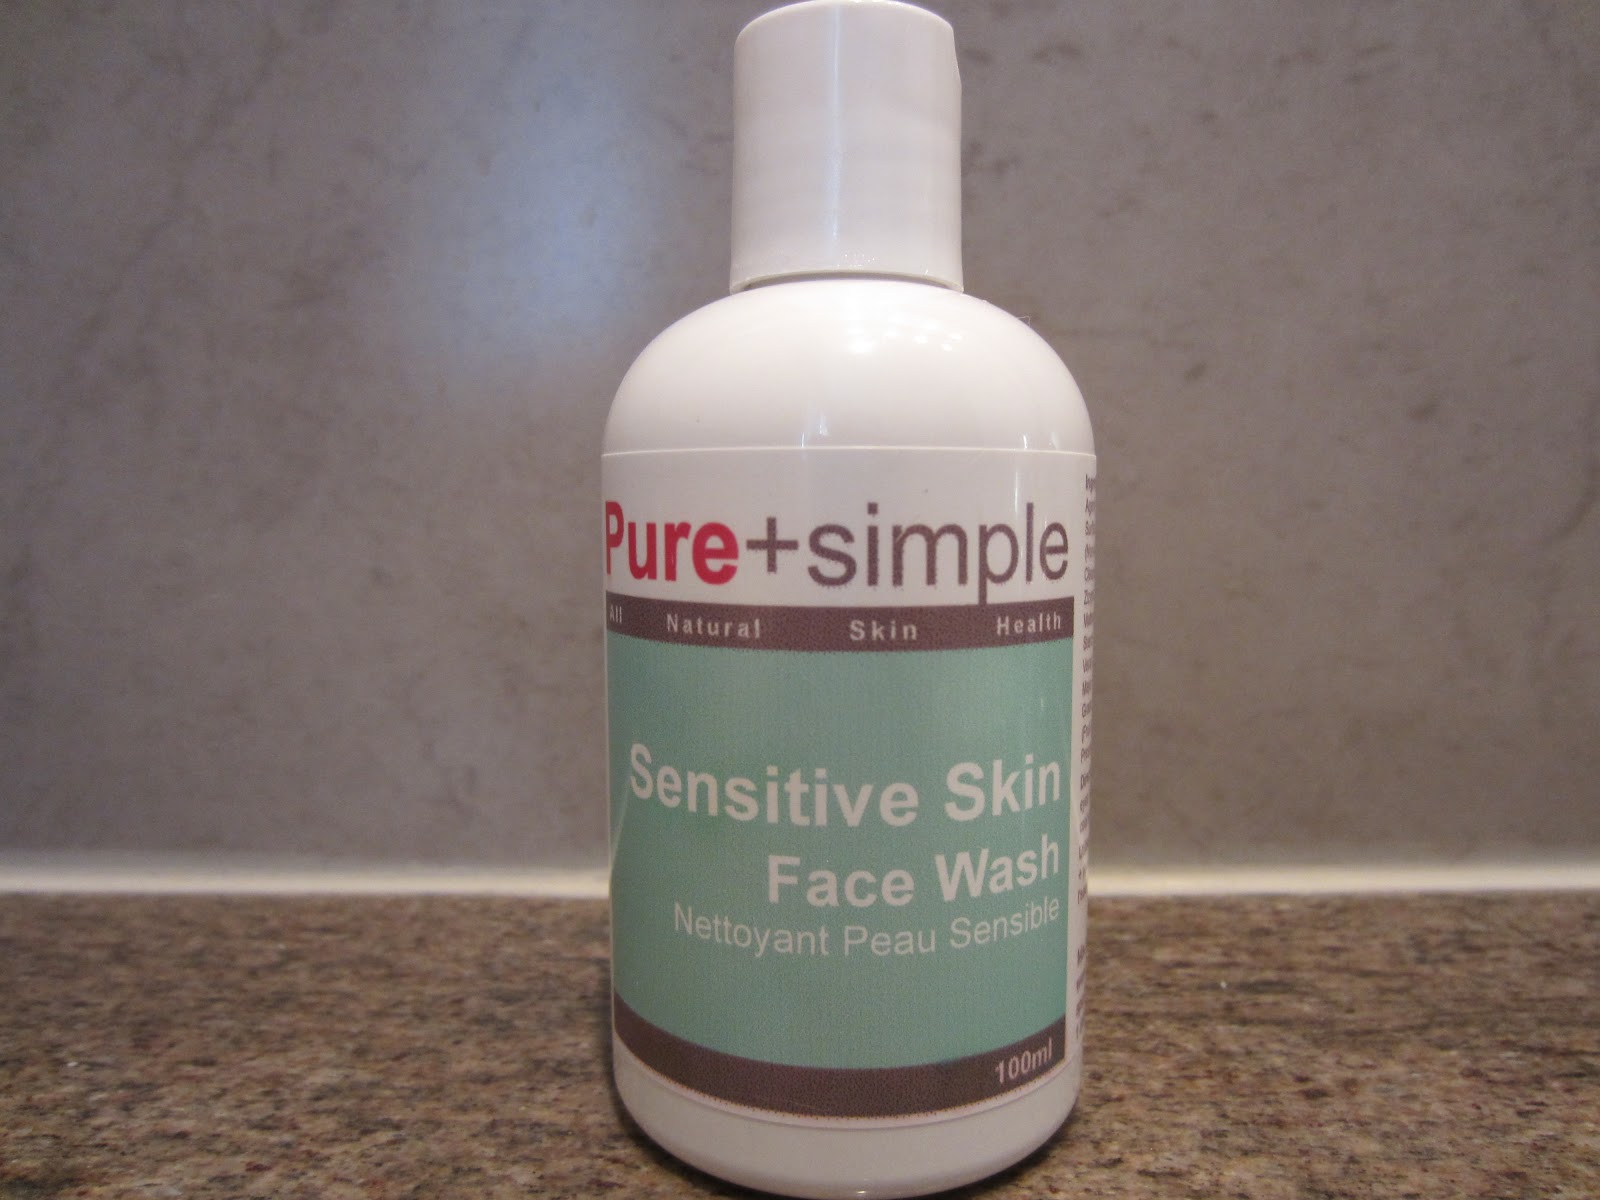 Live It, Love It, Green It: Pure+Simple: Sensitive Skin Face Wash Review